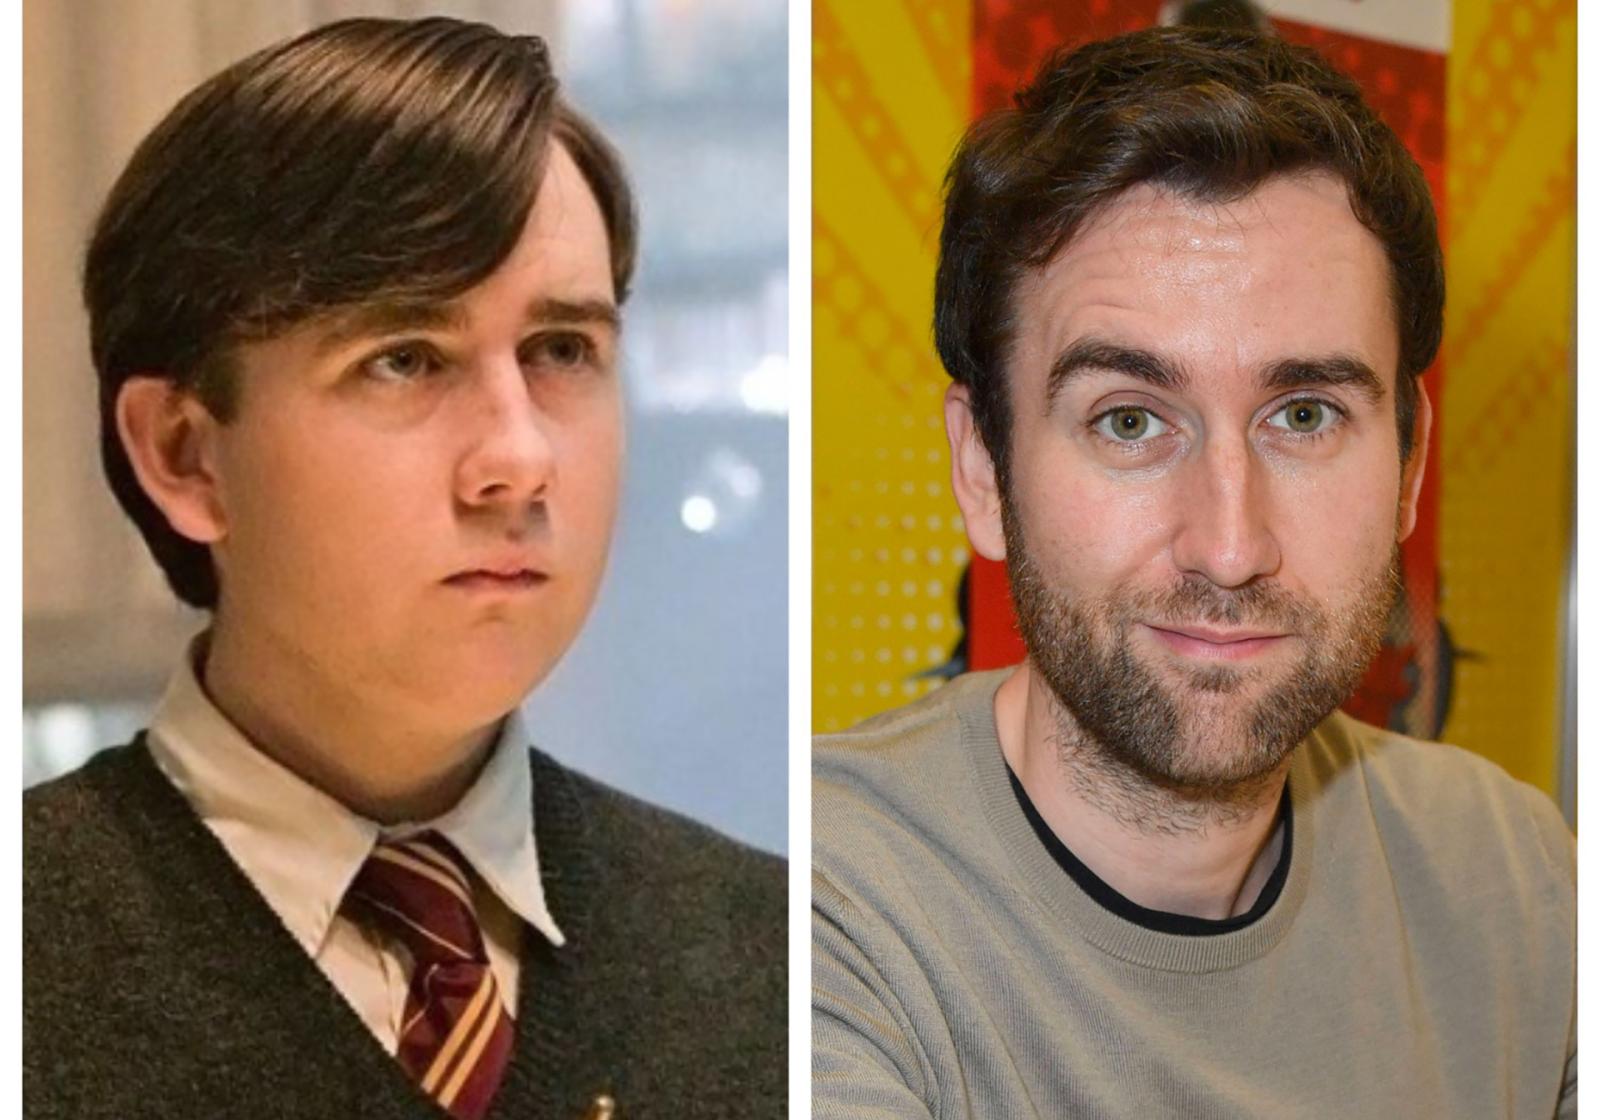 20 Years On: Here's What The Cast of Harry Potter Look Like Now - image 11